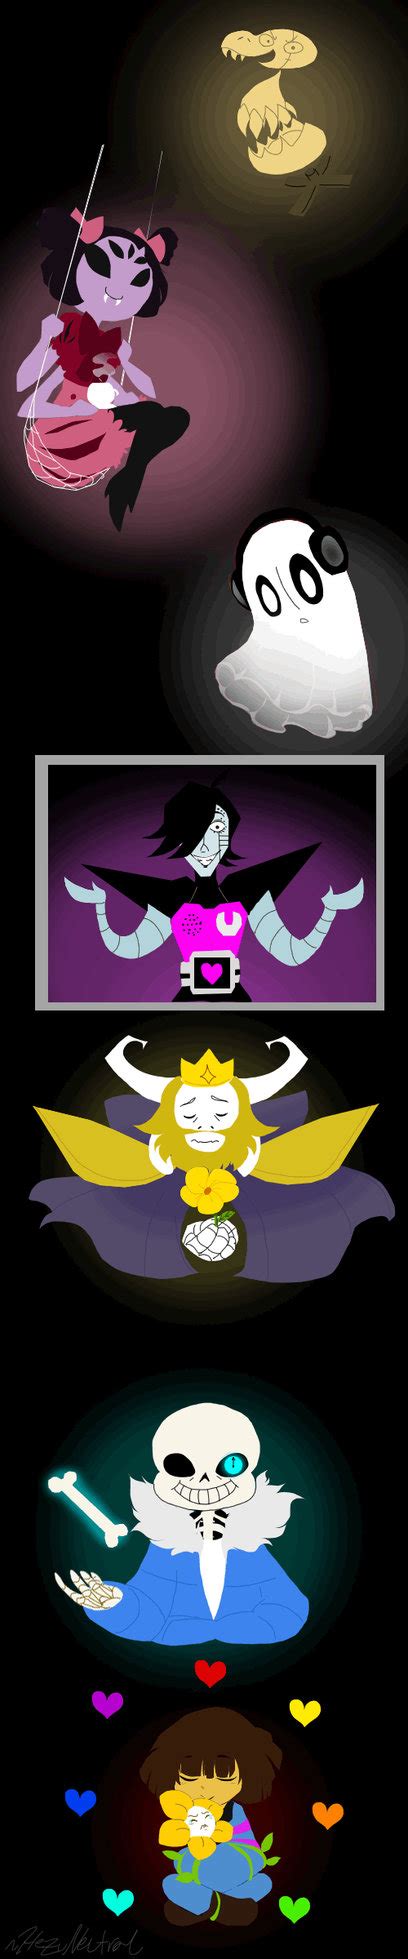 Undertale Animation Fav Charas By Hezuneutral On Deviantart